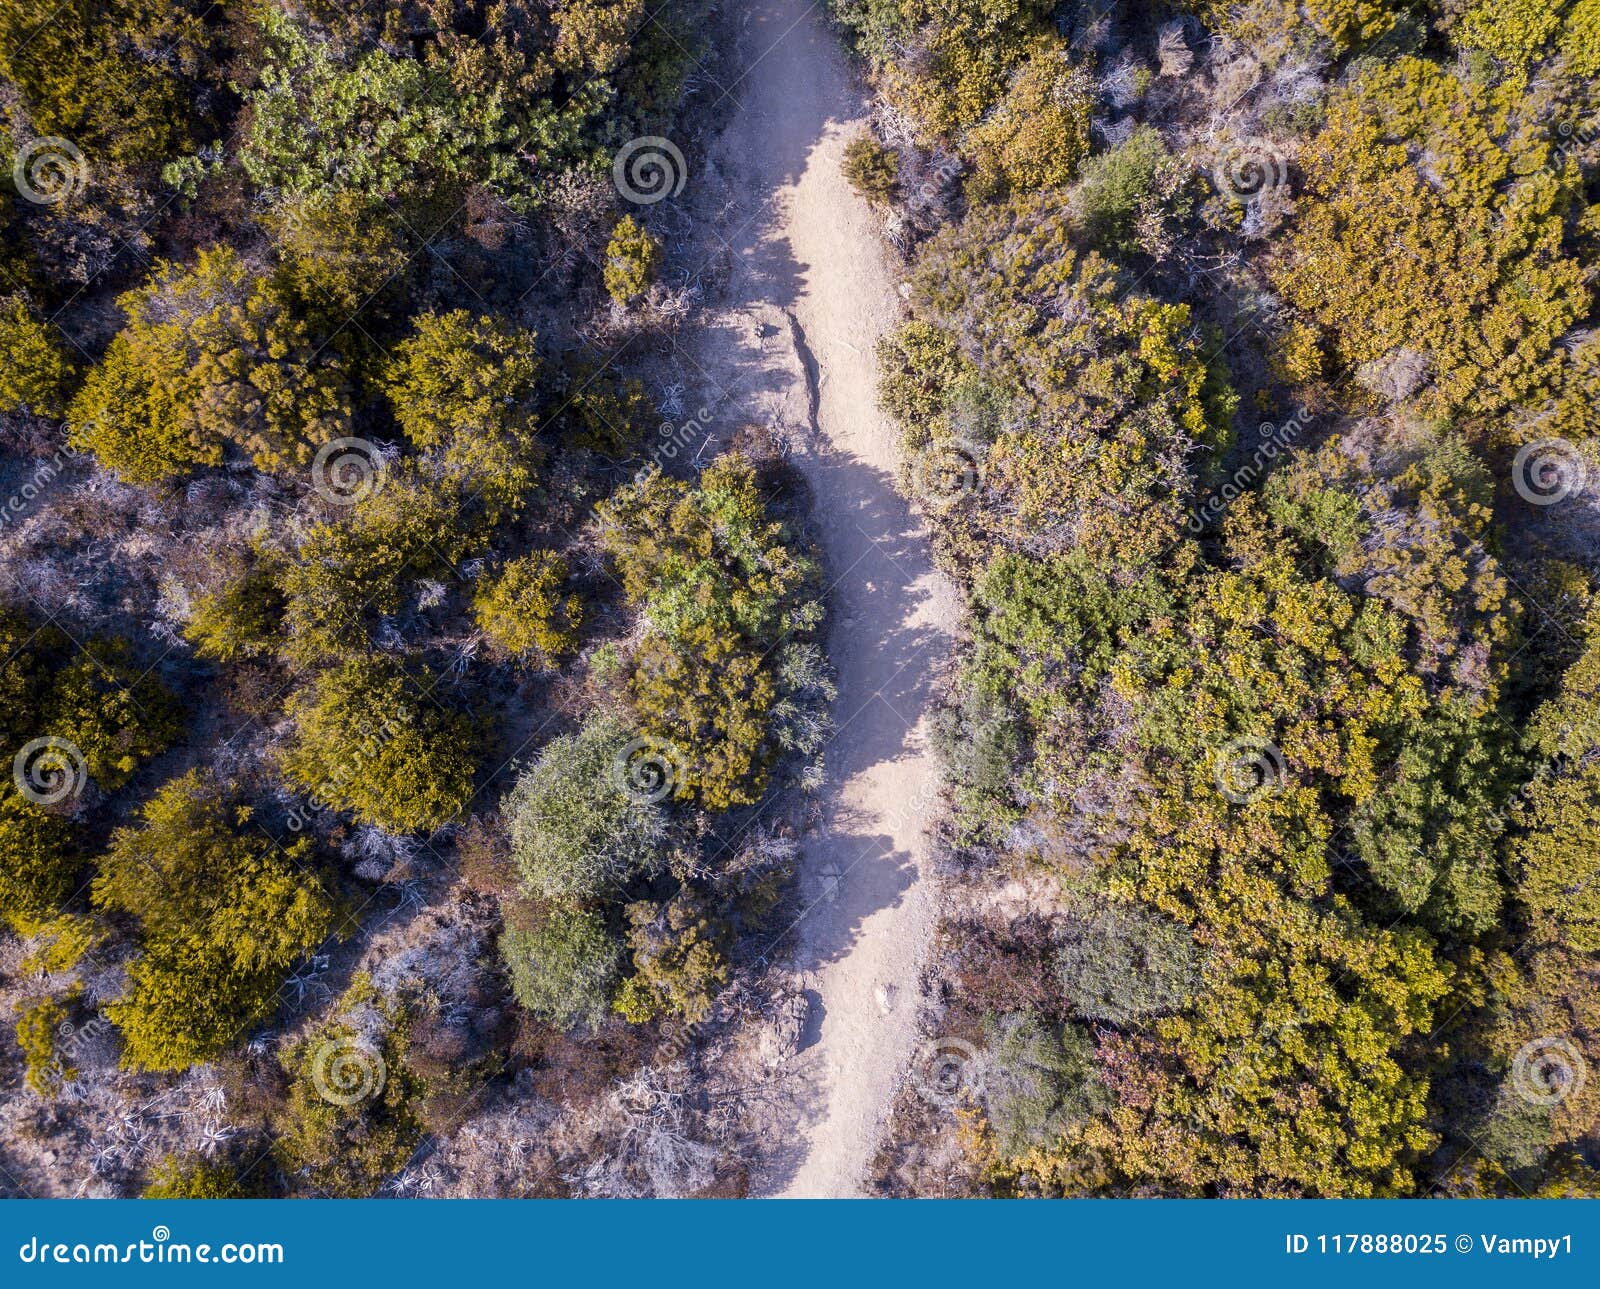 aerial view of the path of customs officers, vegetation and mediterranean bush, corsica, france. sentier du douanier